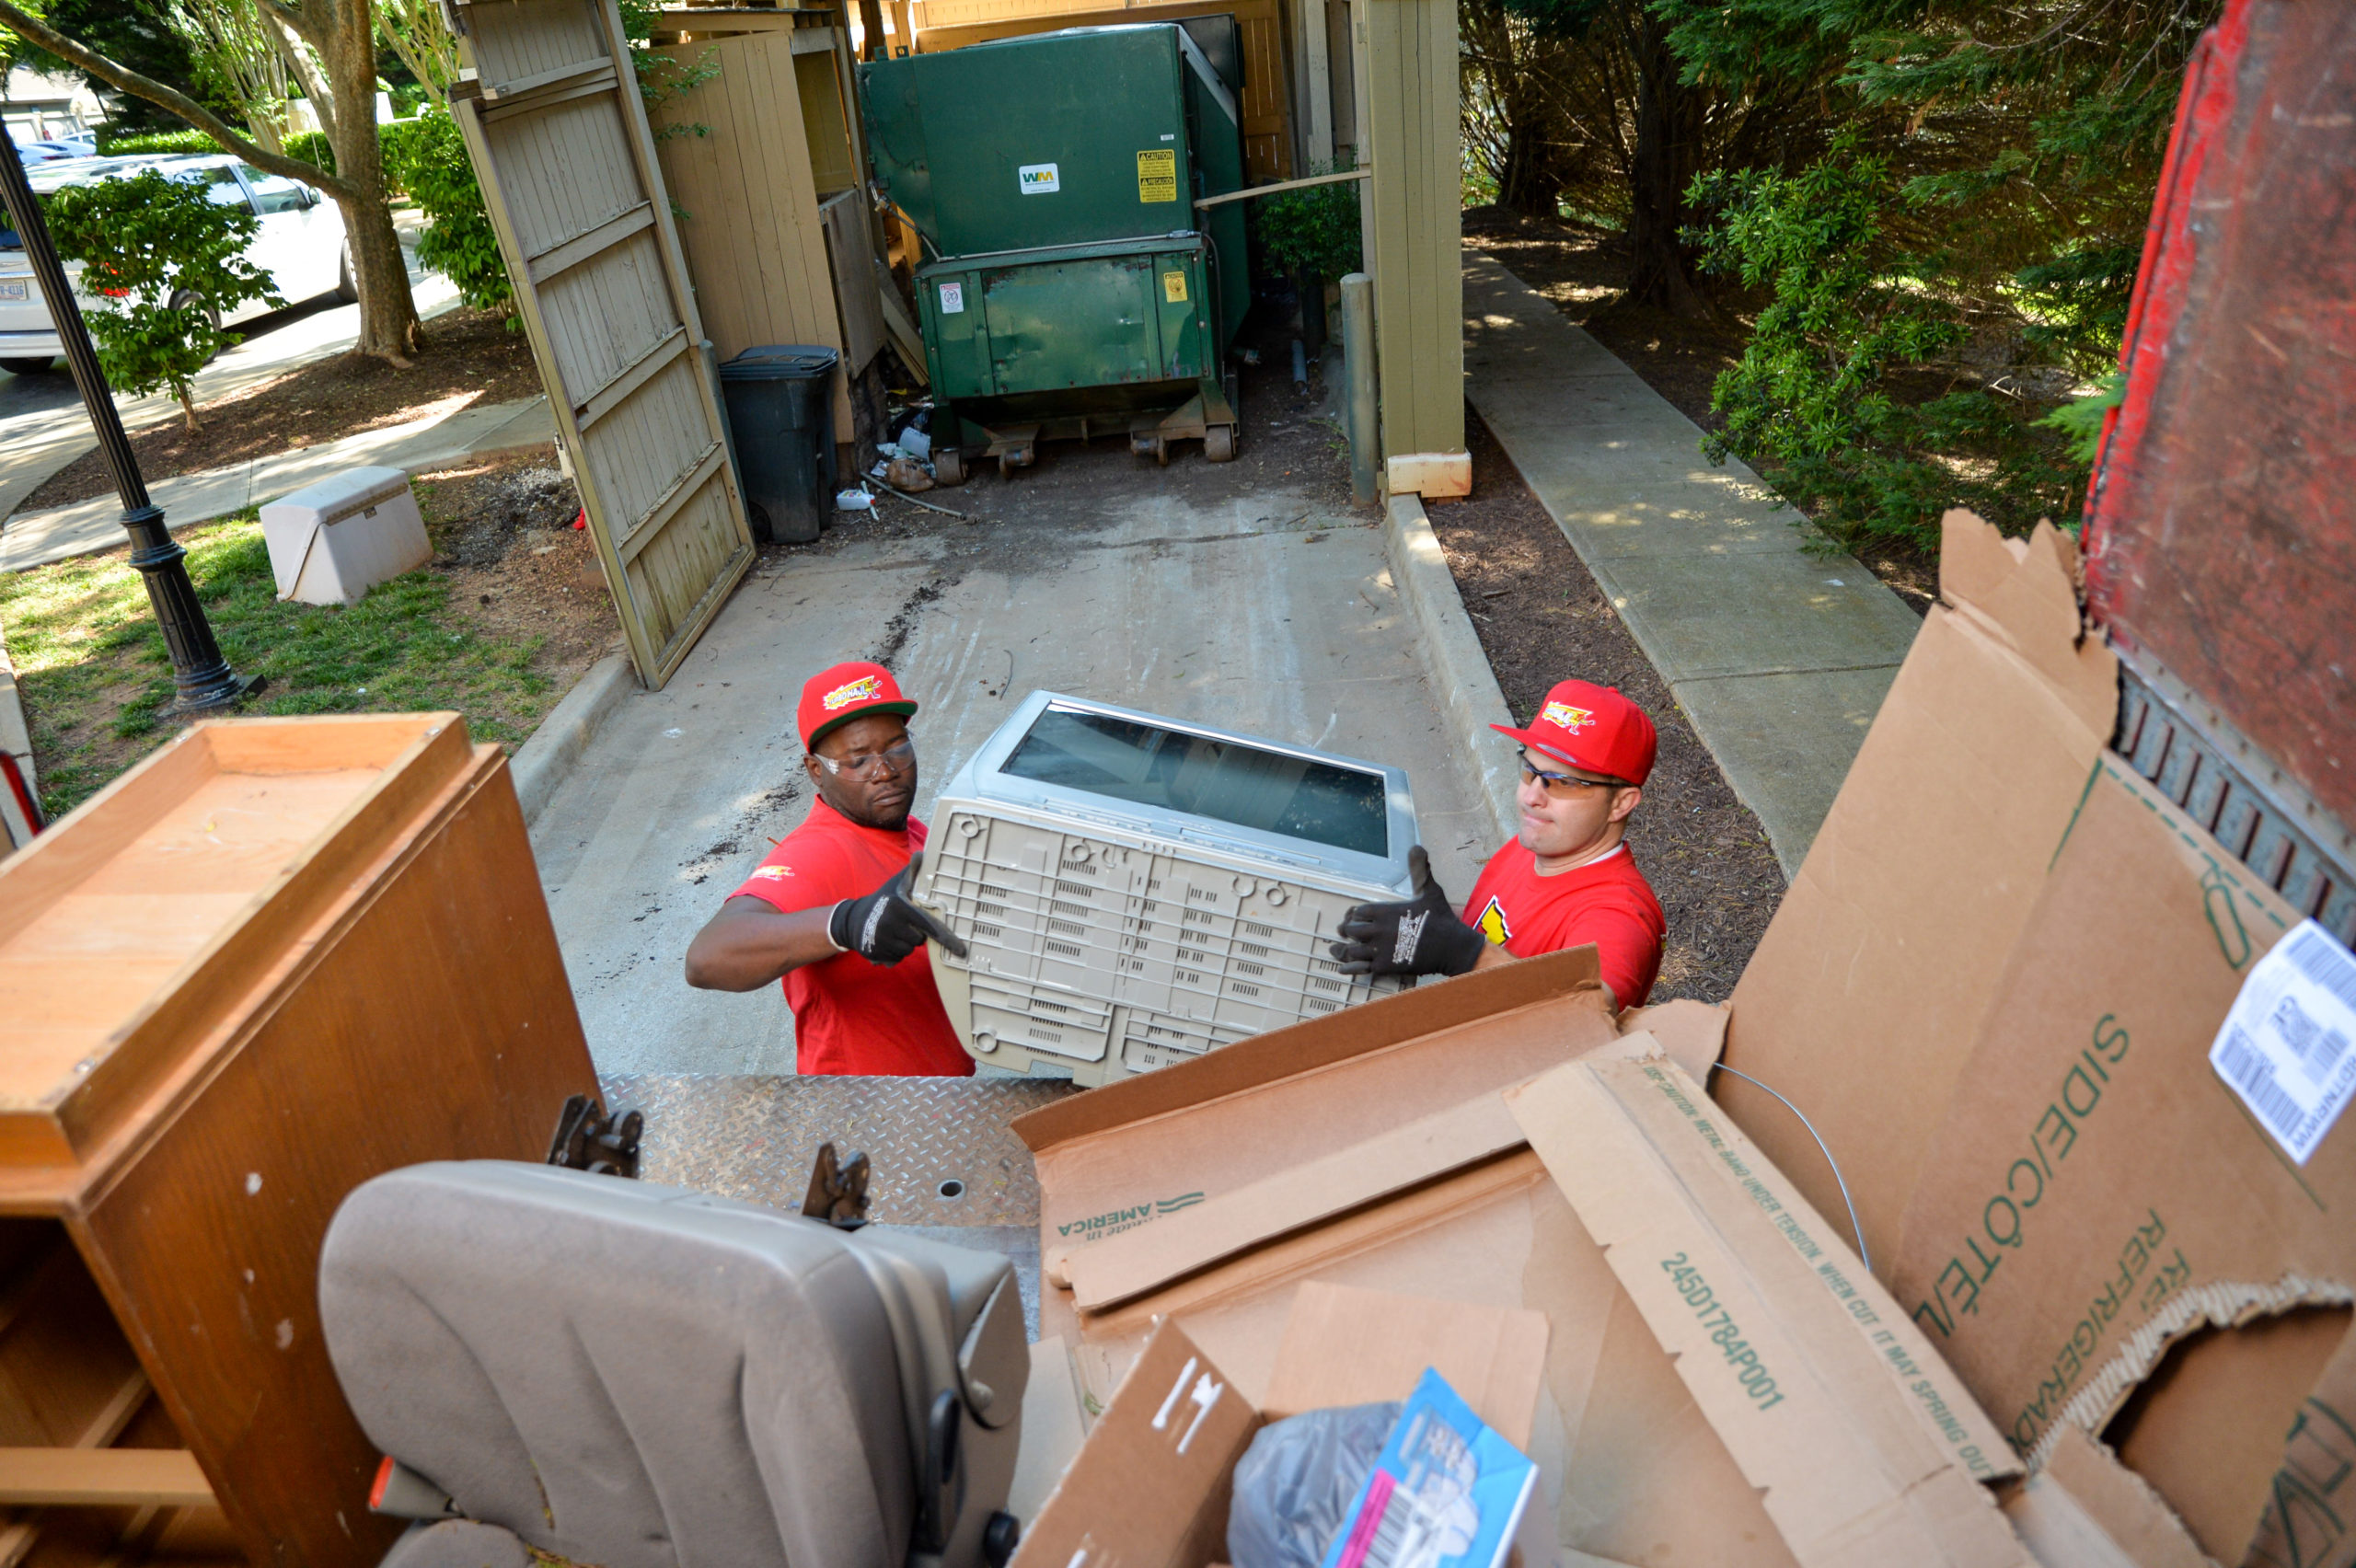 Glenelg junk removal specialists lift an old TV into the back of a truck